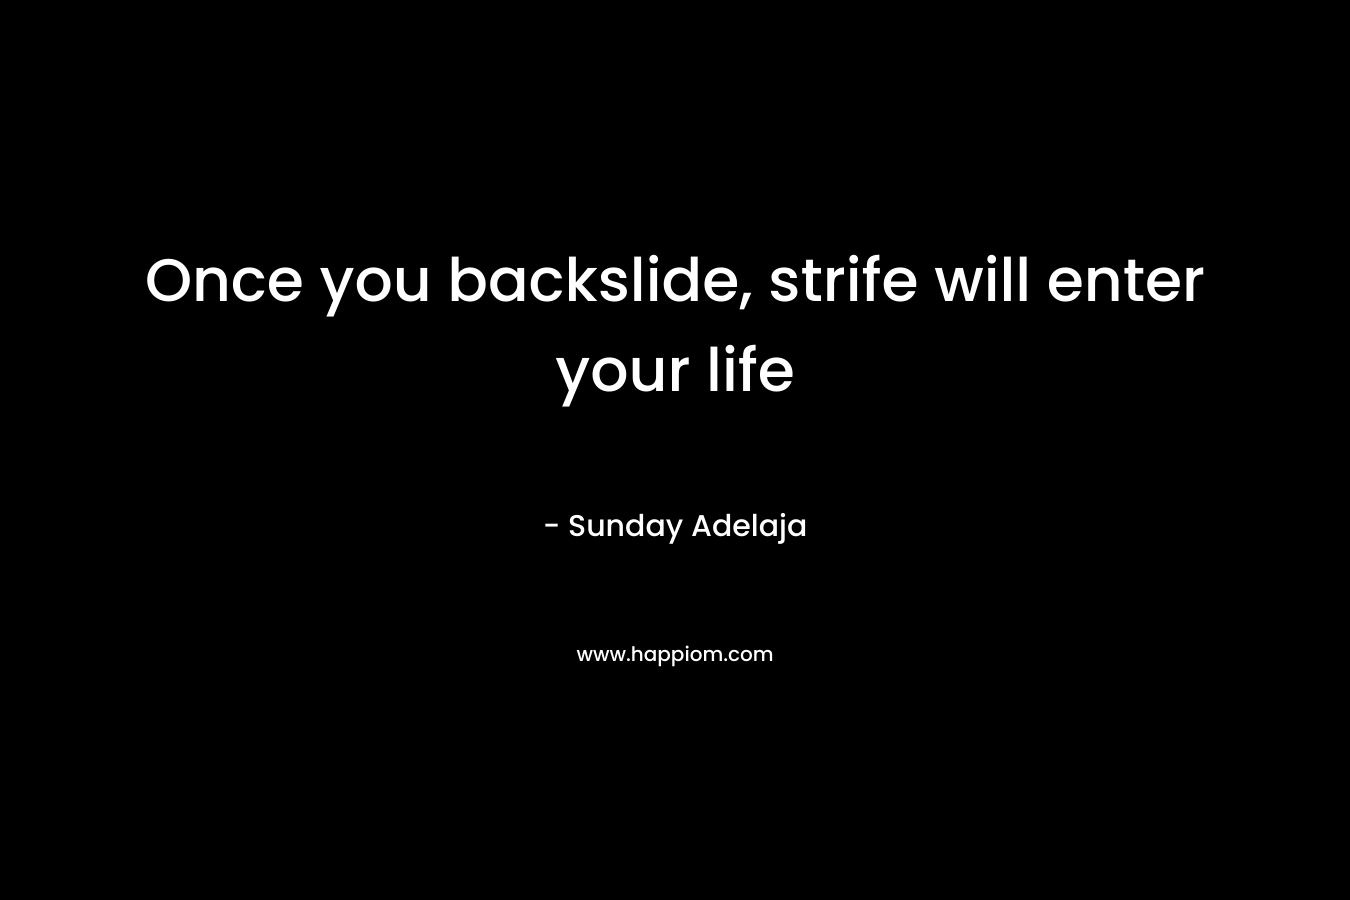 Once you backslide, strife will enter your life